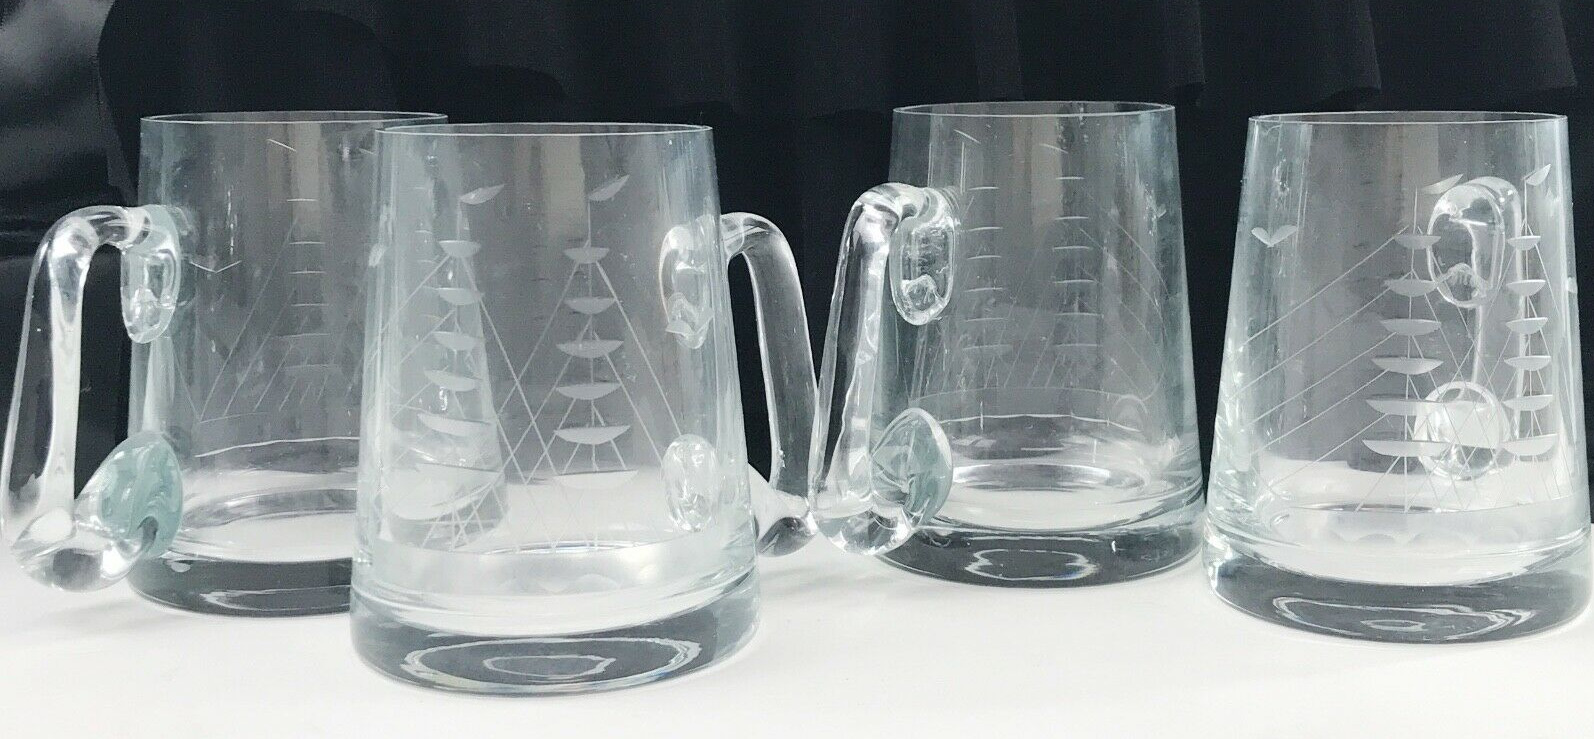 Poland Made Mugs Vintage Heavy Glass Steins 4 Cup Nautical Etched Sail Ship Bar